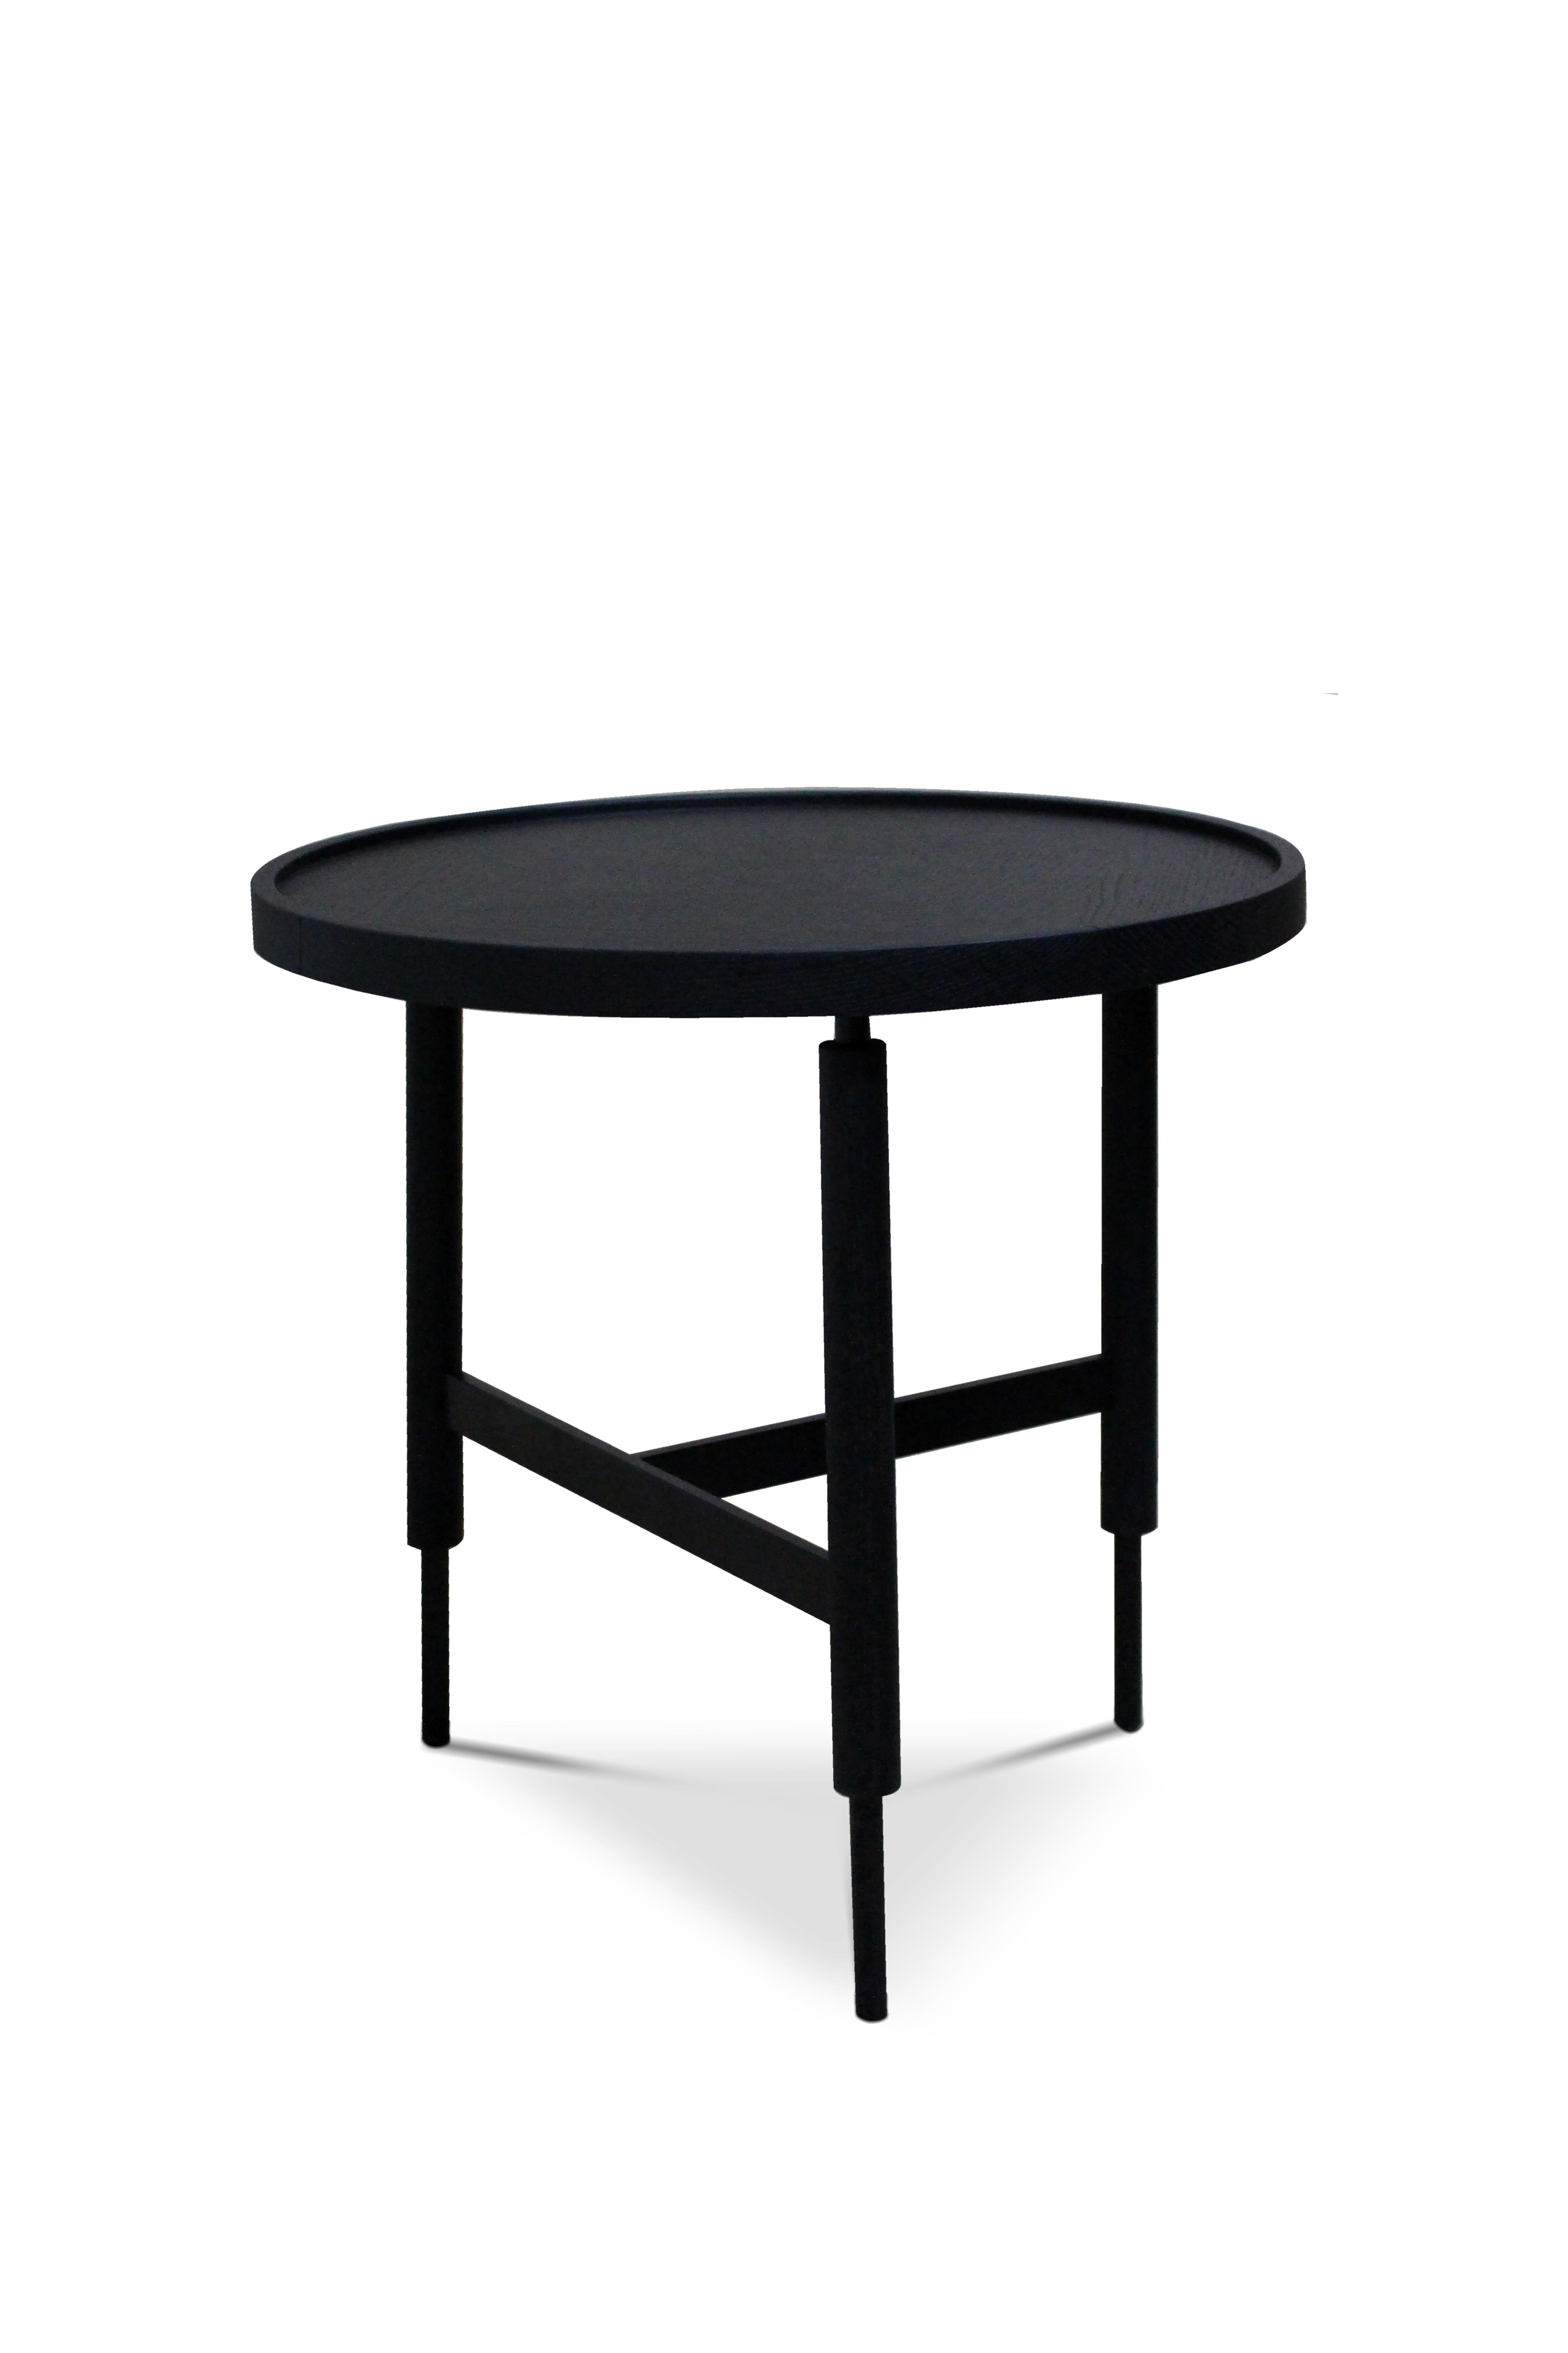 Unique collin black side table by Collector
Dimensions: D 50 x H 50 cm
Materials: glass, oak, metal
Other materials available. 

The Collector brand aims to be part of the daily life by fusing furniture to our home routine and lifestyle, that’s